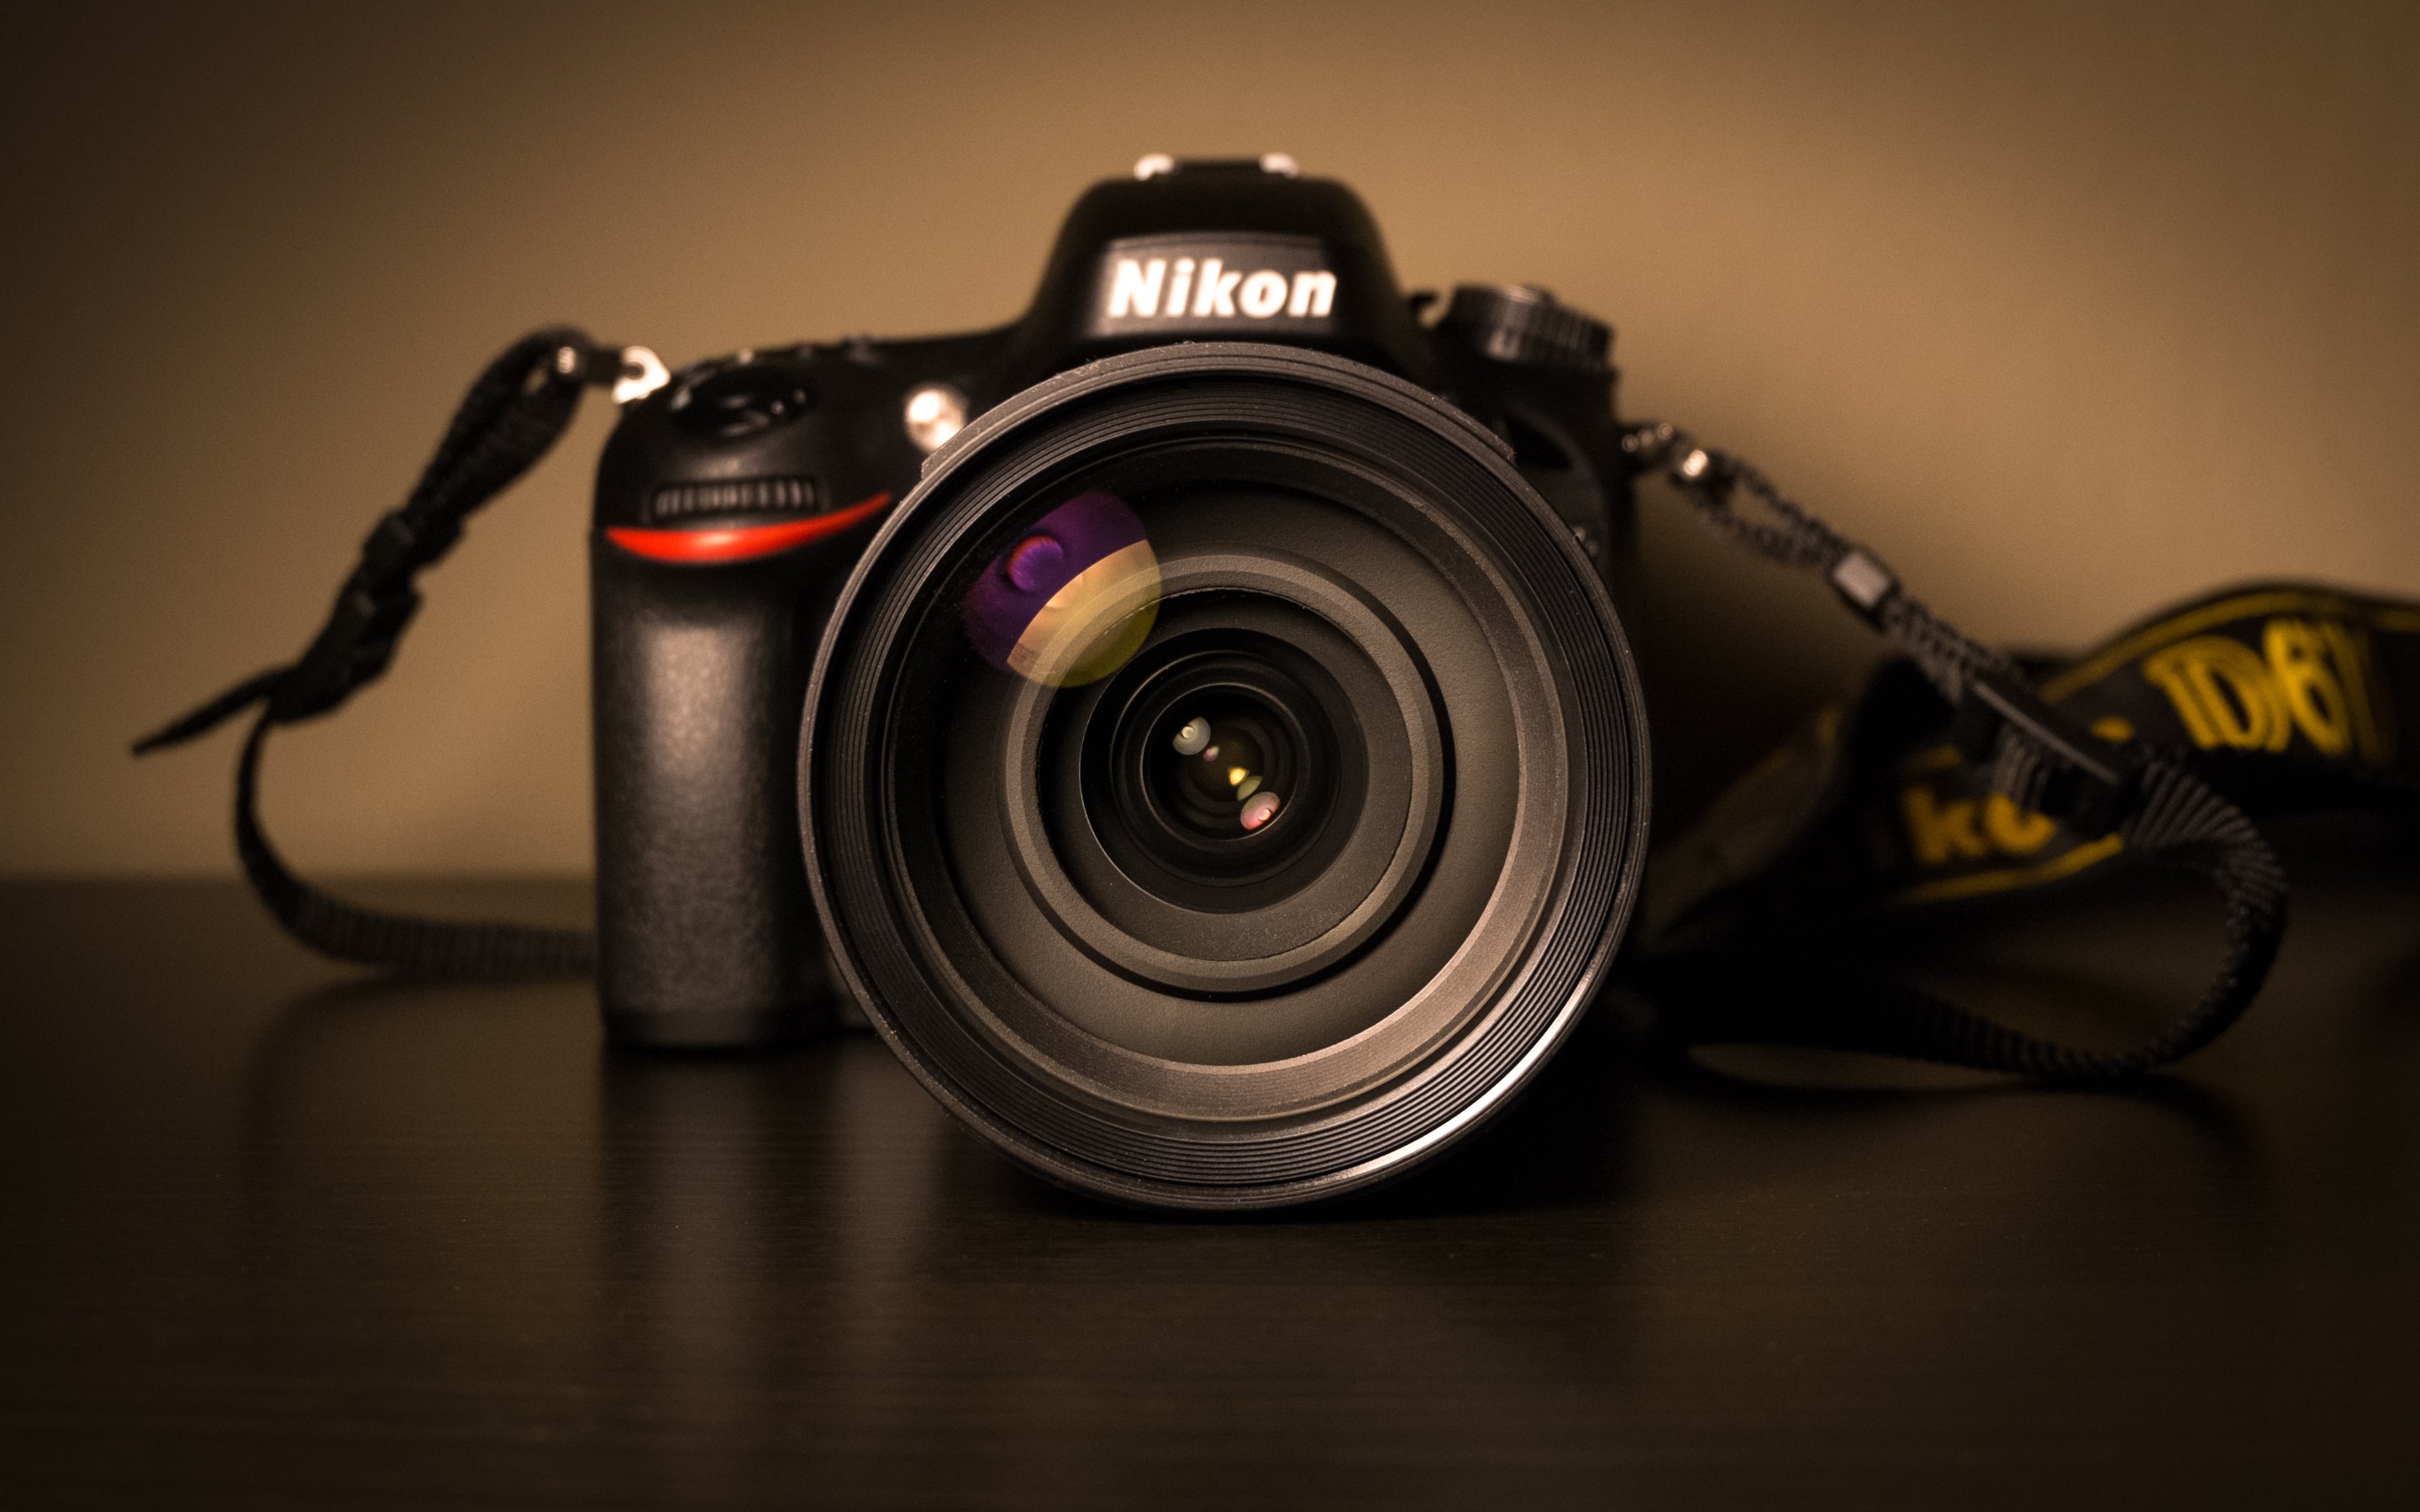 Points to Keep in Mind While Buying a DSLR Camera